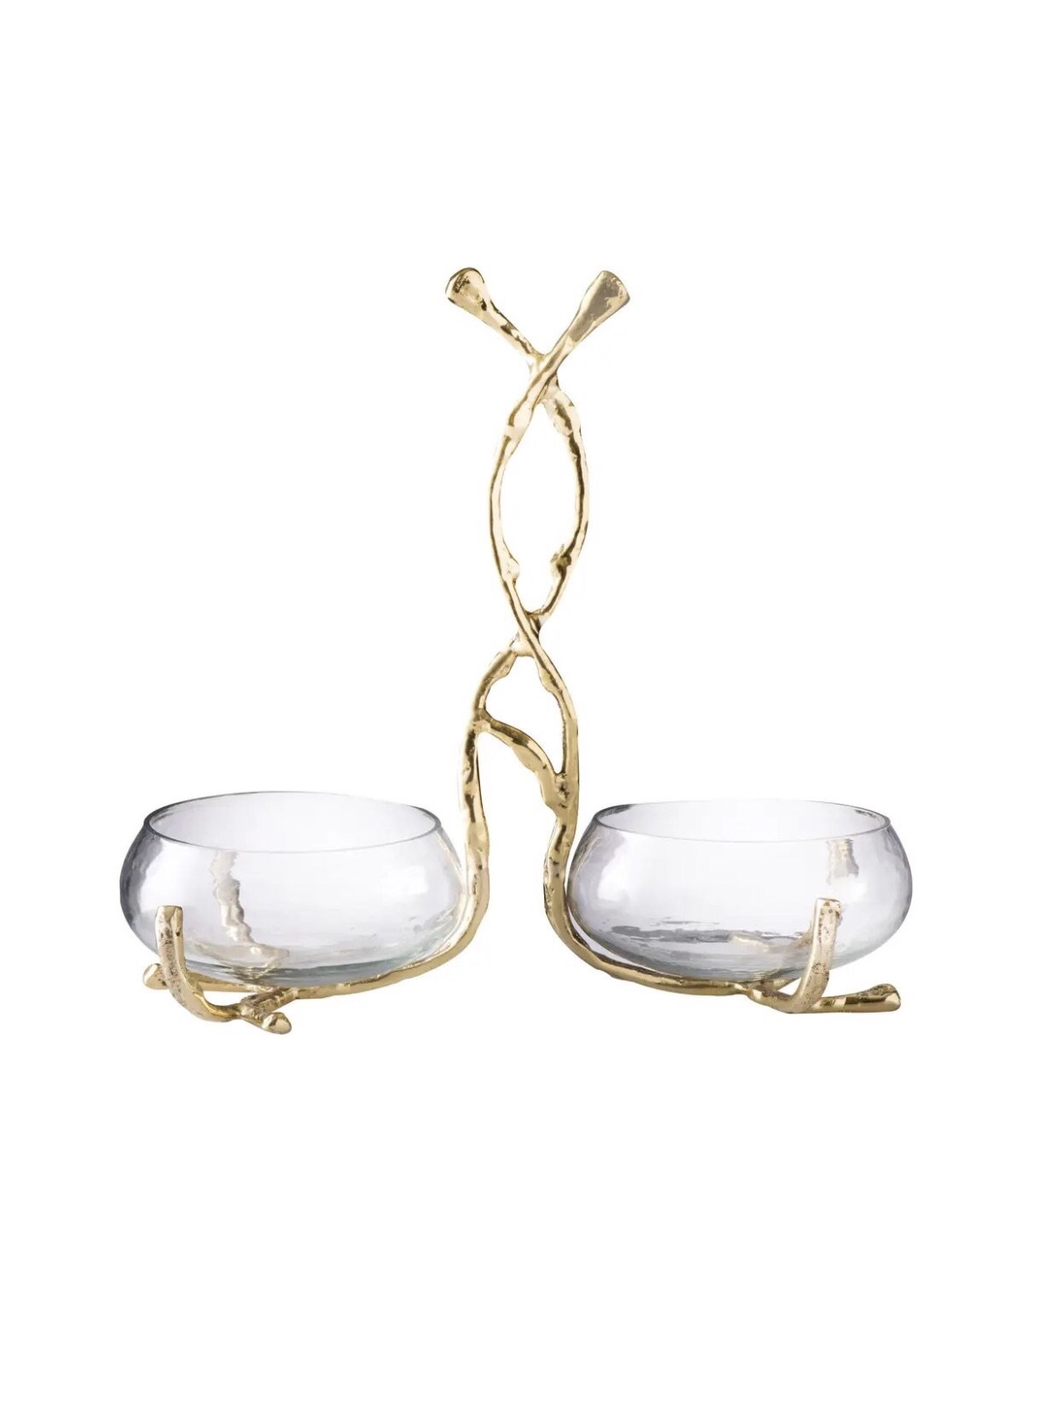 2 Sectional Glass Dish With Gold Design